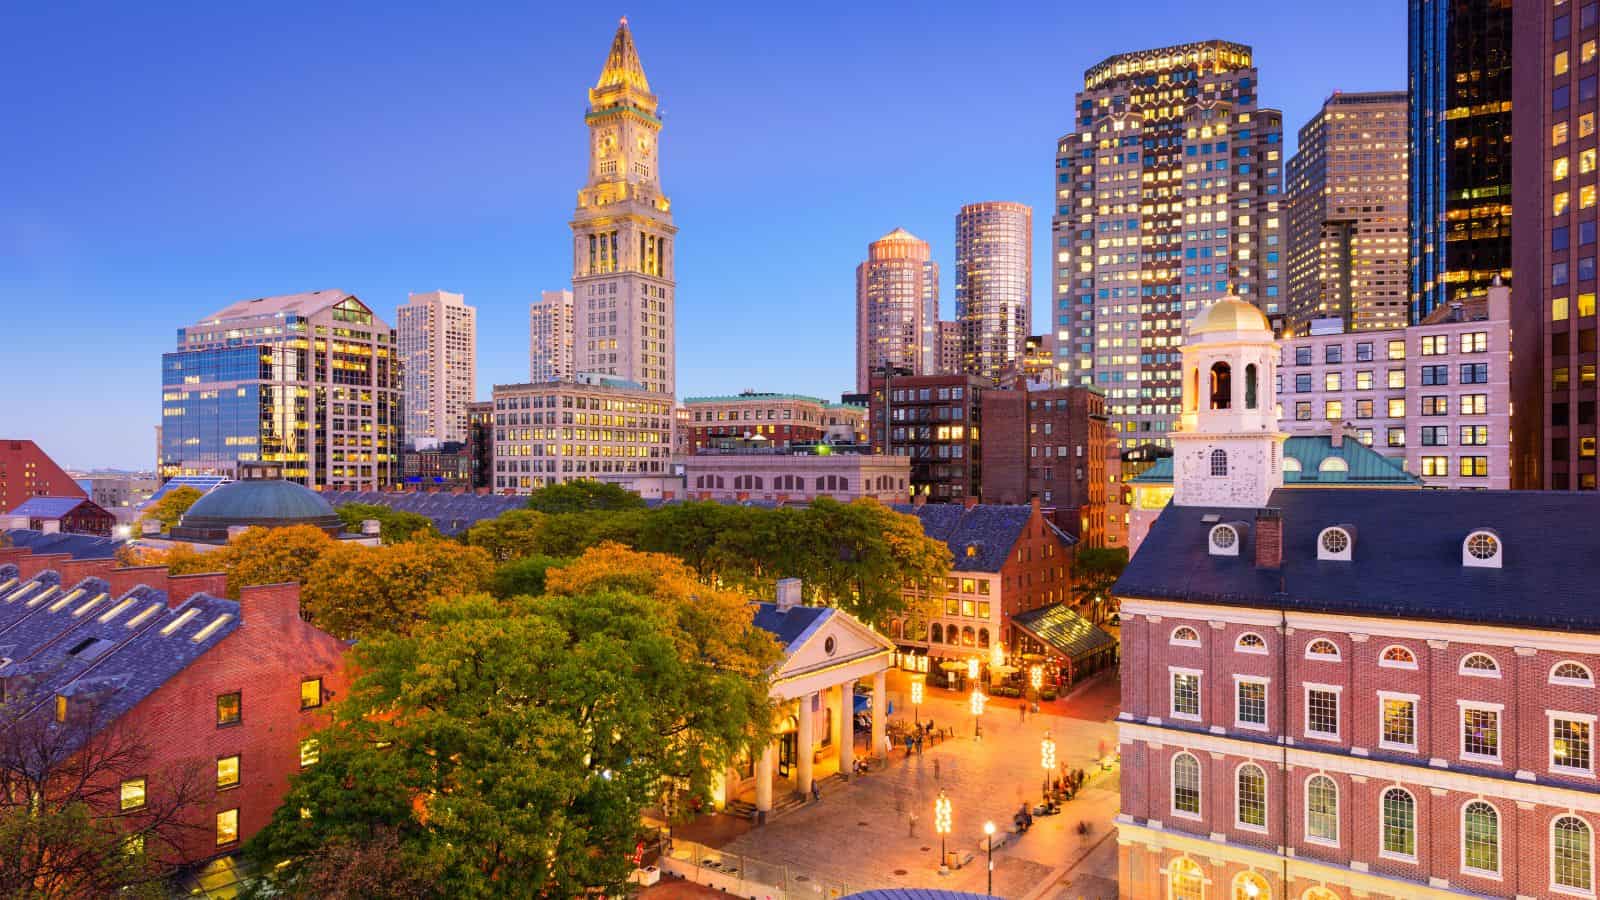 <p>Boston is a historical city that experiences significant rates of tourism and also has an impressive educational sector, making it a popular place to live and visit. Unfortunately, this means that the city faces increasingly high costs in the housing, transportation, healthcare, and education sectors.</p>